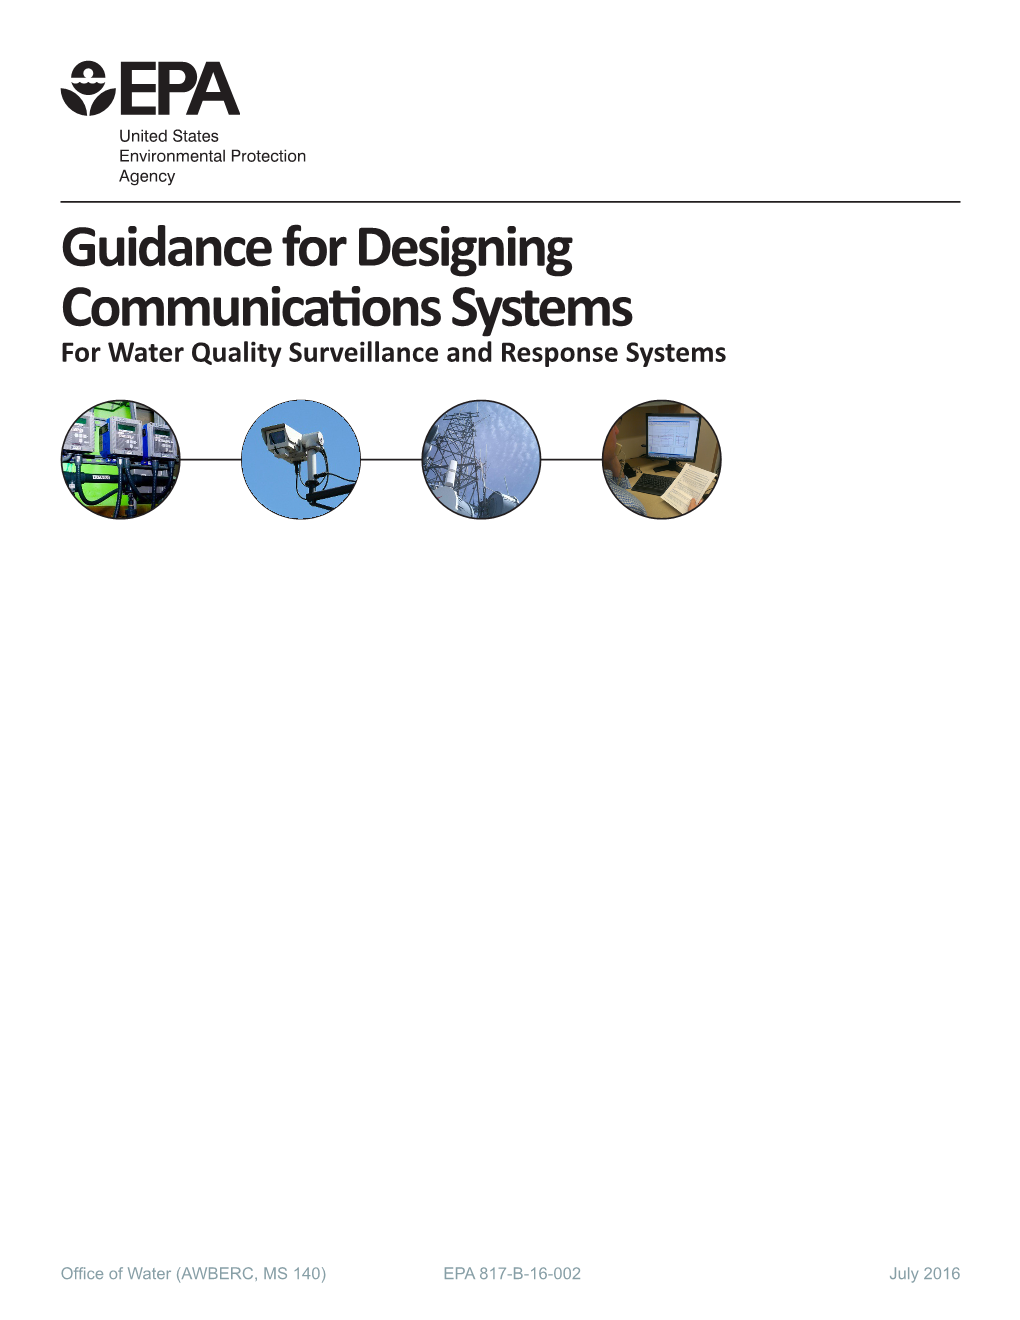 Guidance for Designing Communications Systems for Water Quality Surveillance and Response Systems